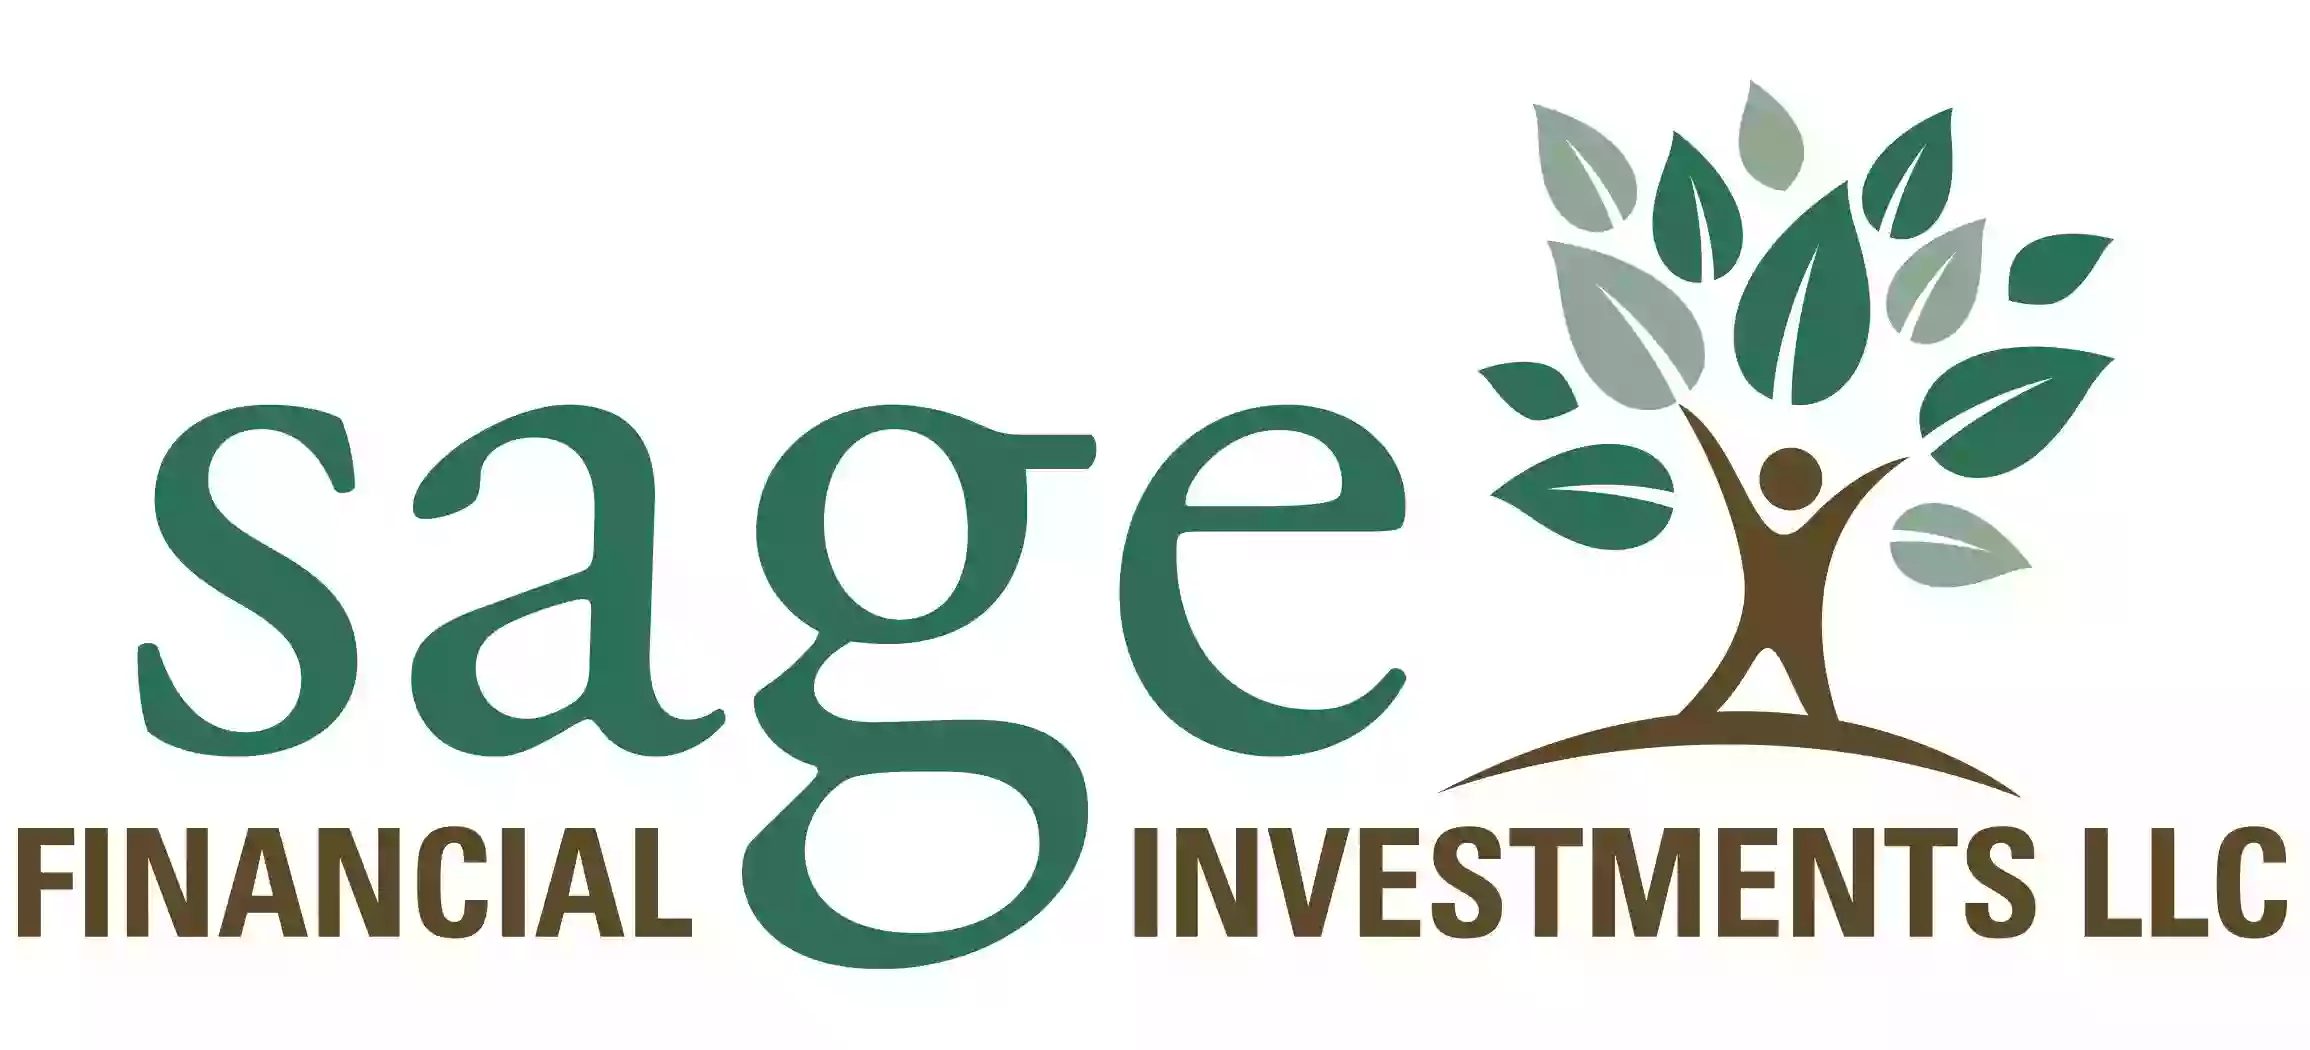 Sage Capone - Sage Financial Investments